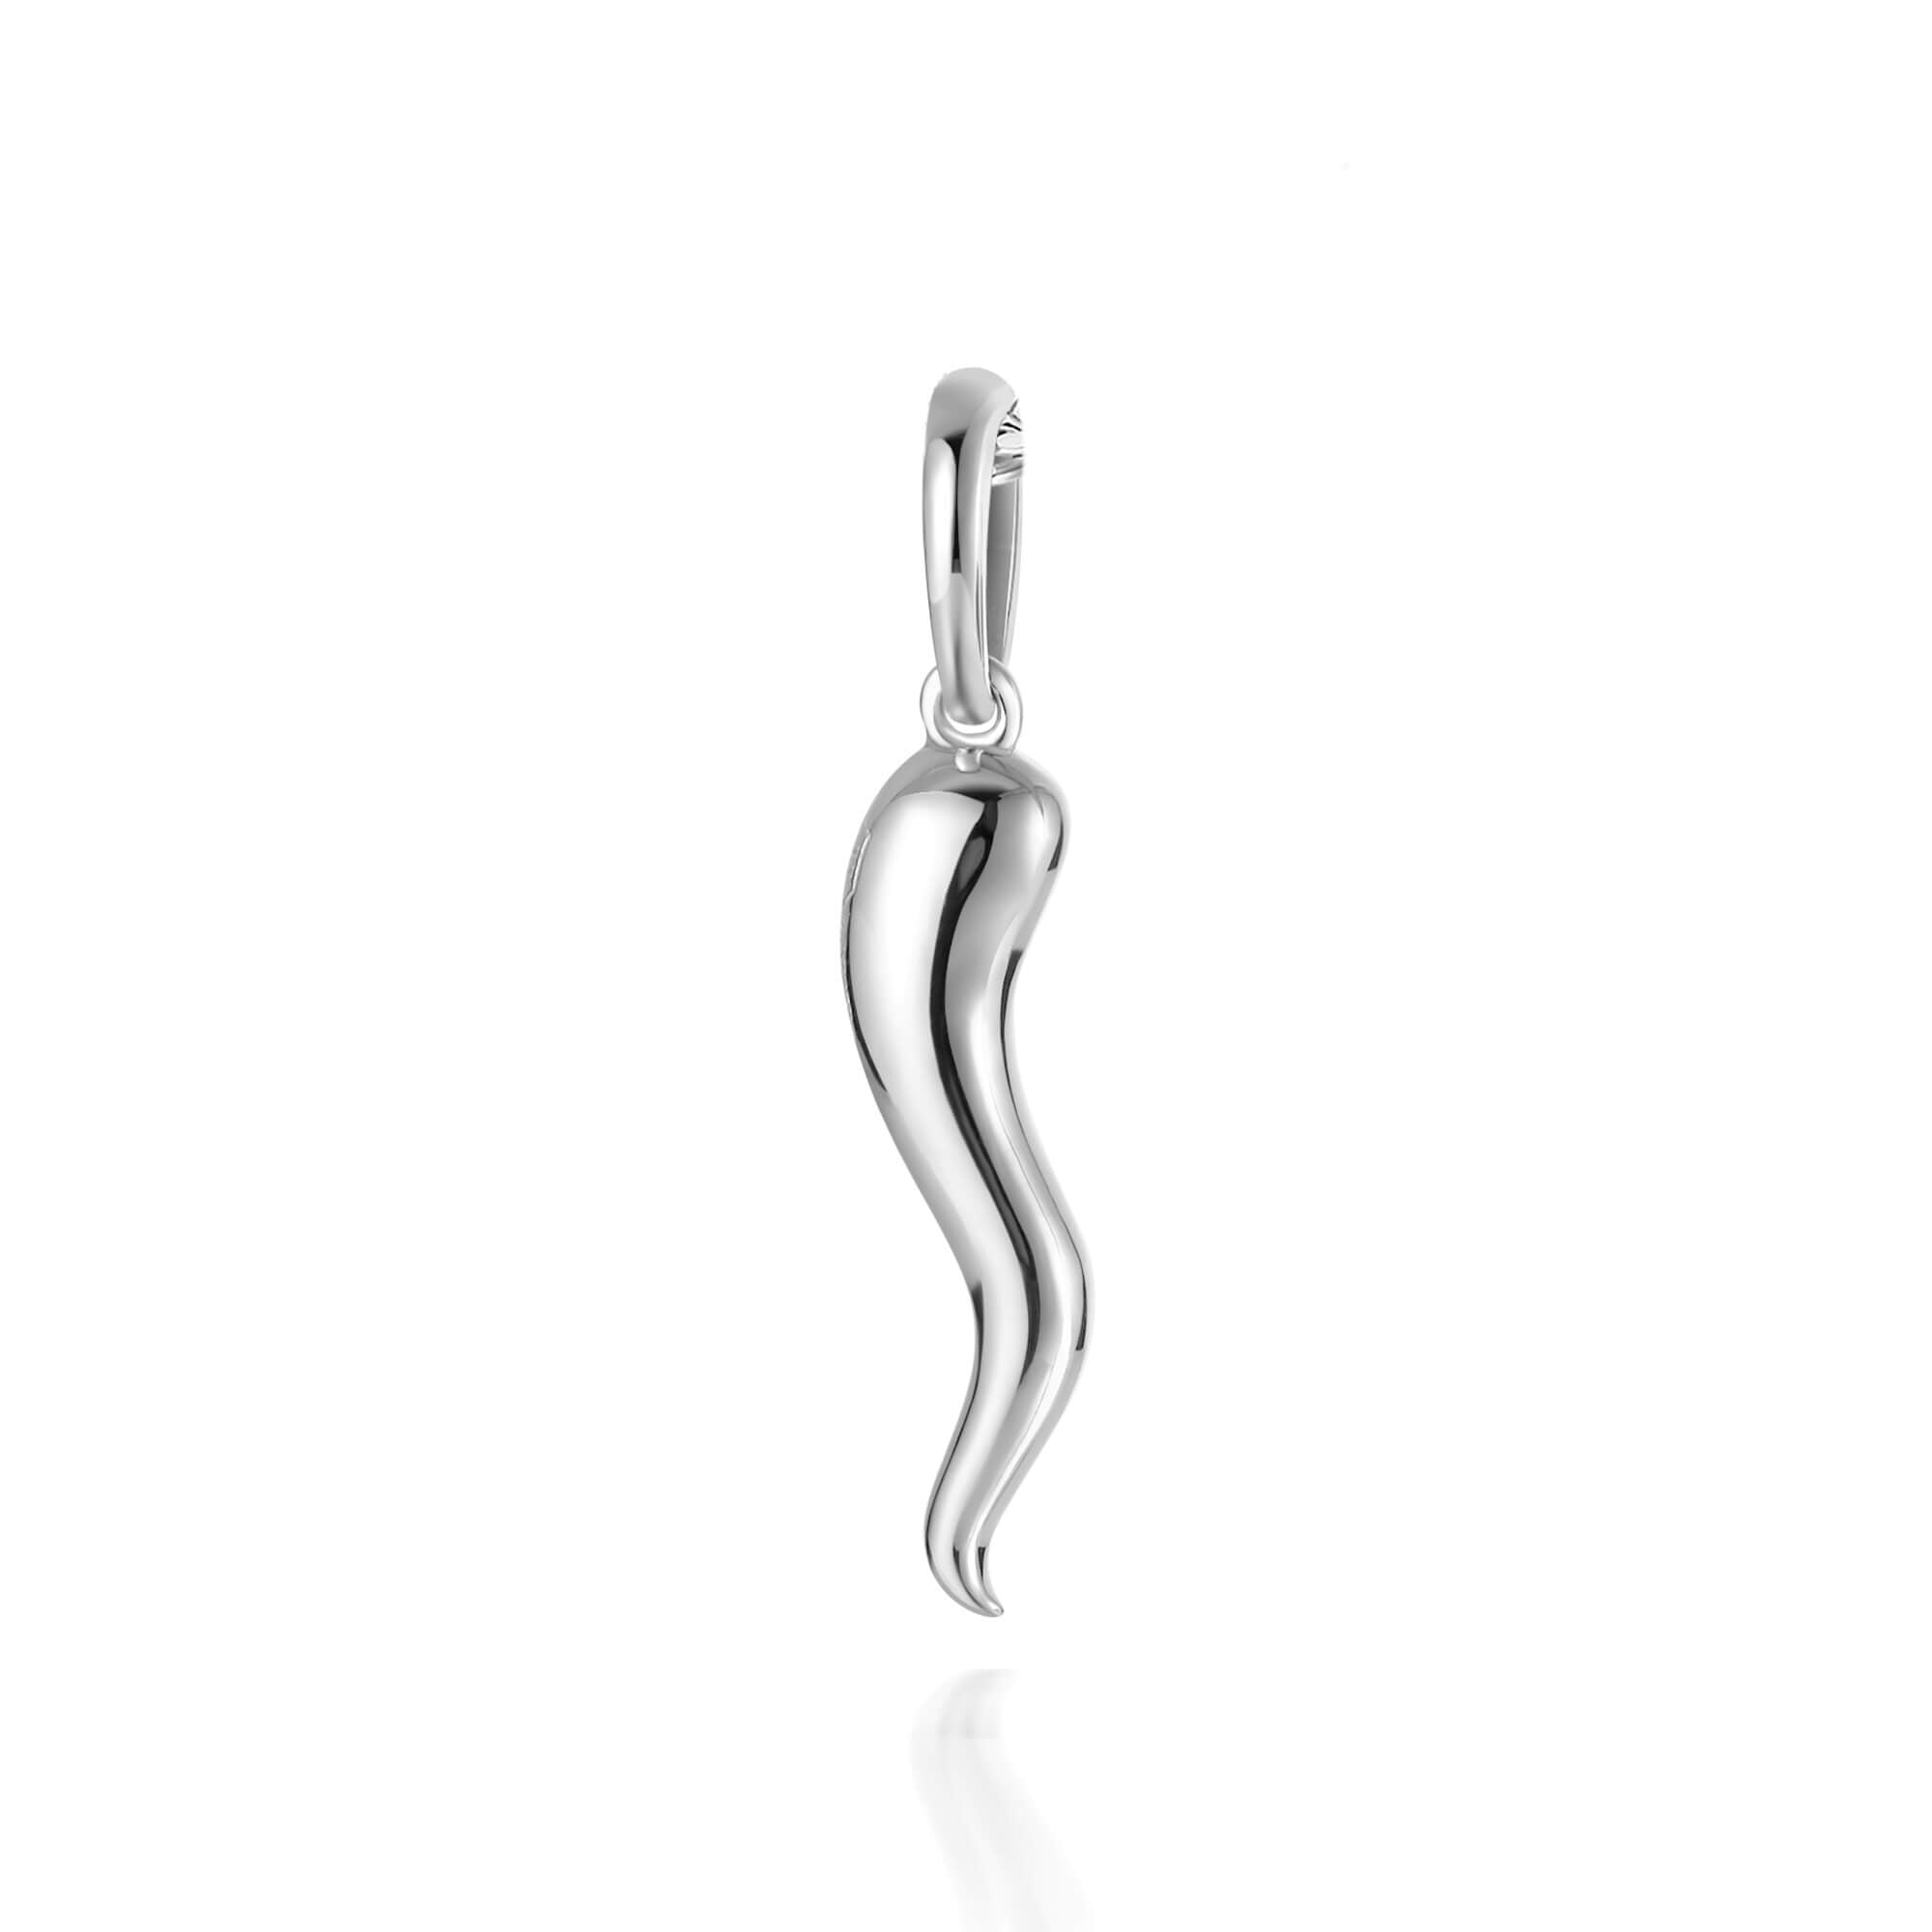 CEKAMA Italian Horn Necklace For Men Sterling Silver Italian Horn Good Luck Pendant  Necklace For Women Protects Us Amulet Jewelry Gift For Father Husband Son  Boyfriend | Amazon.com